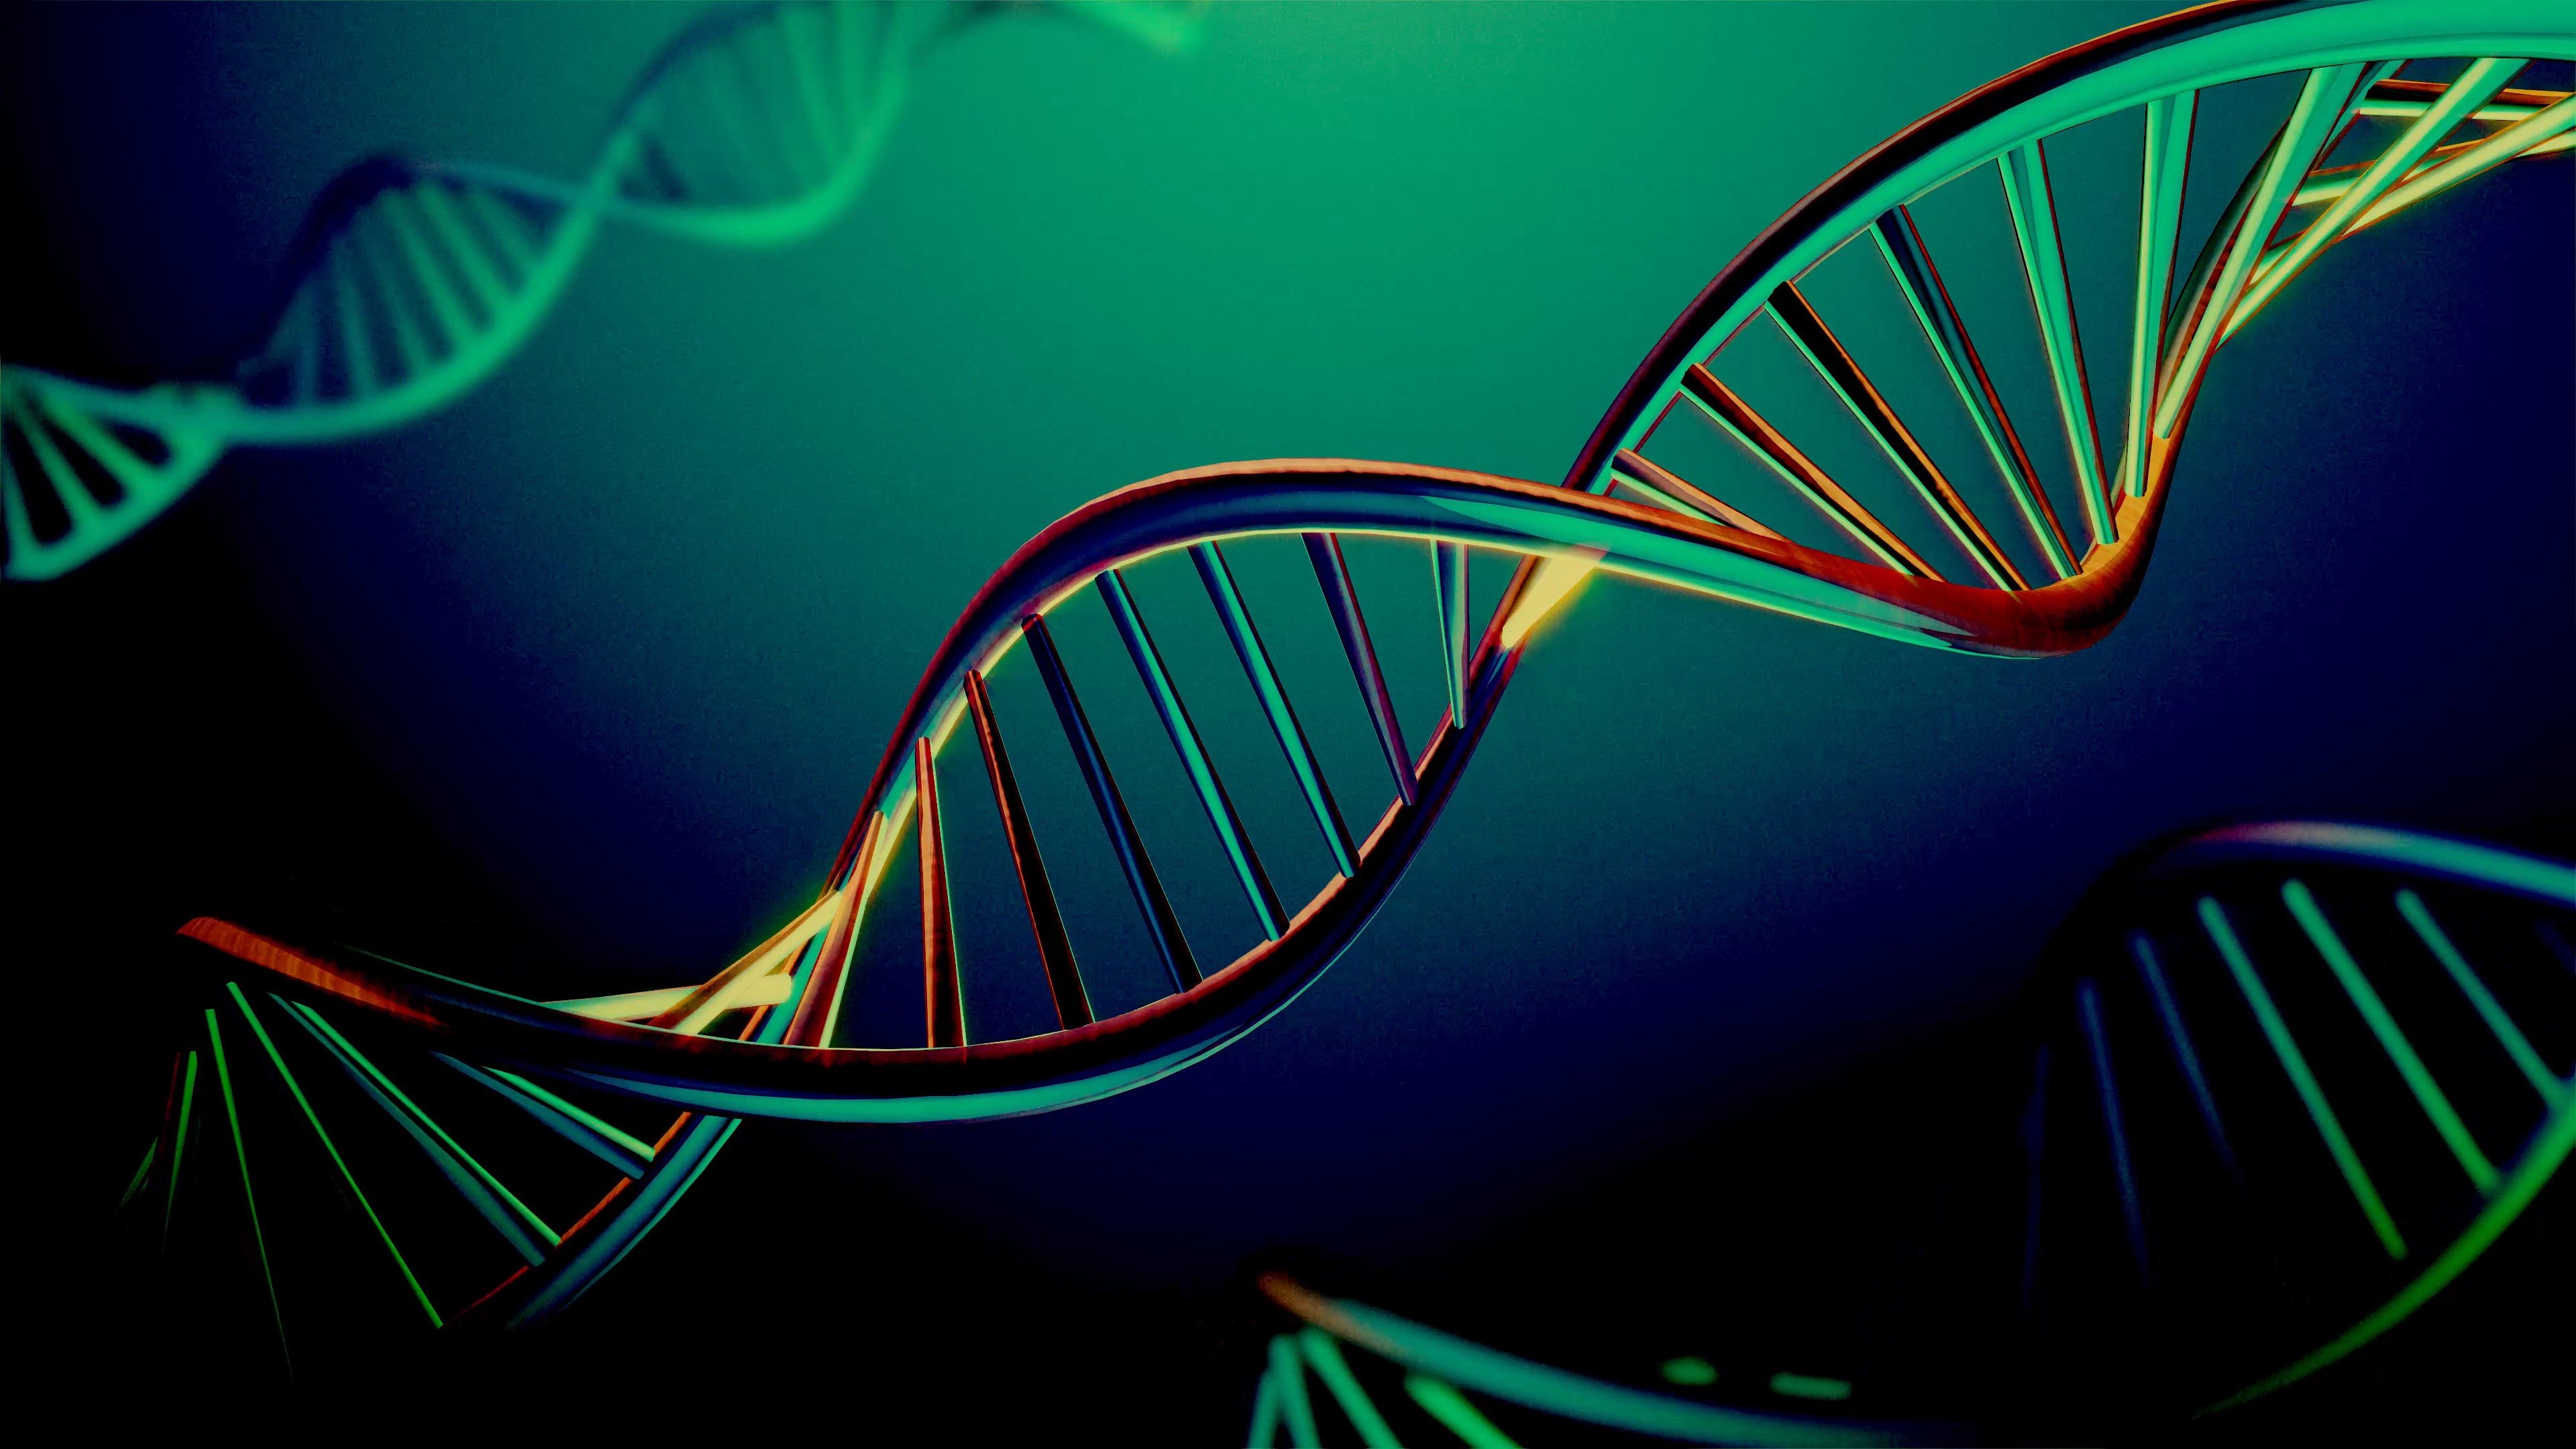 Futuristic DNA medical user interface -stock photo Muhammet CamdereliGetty Images